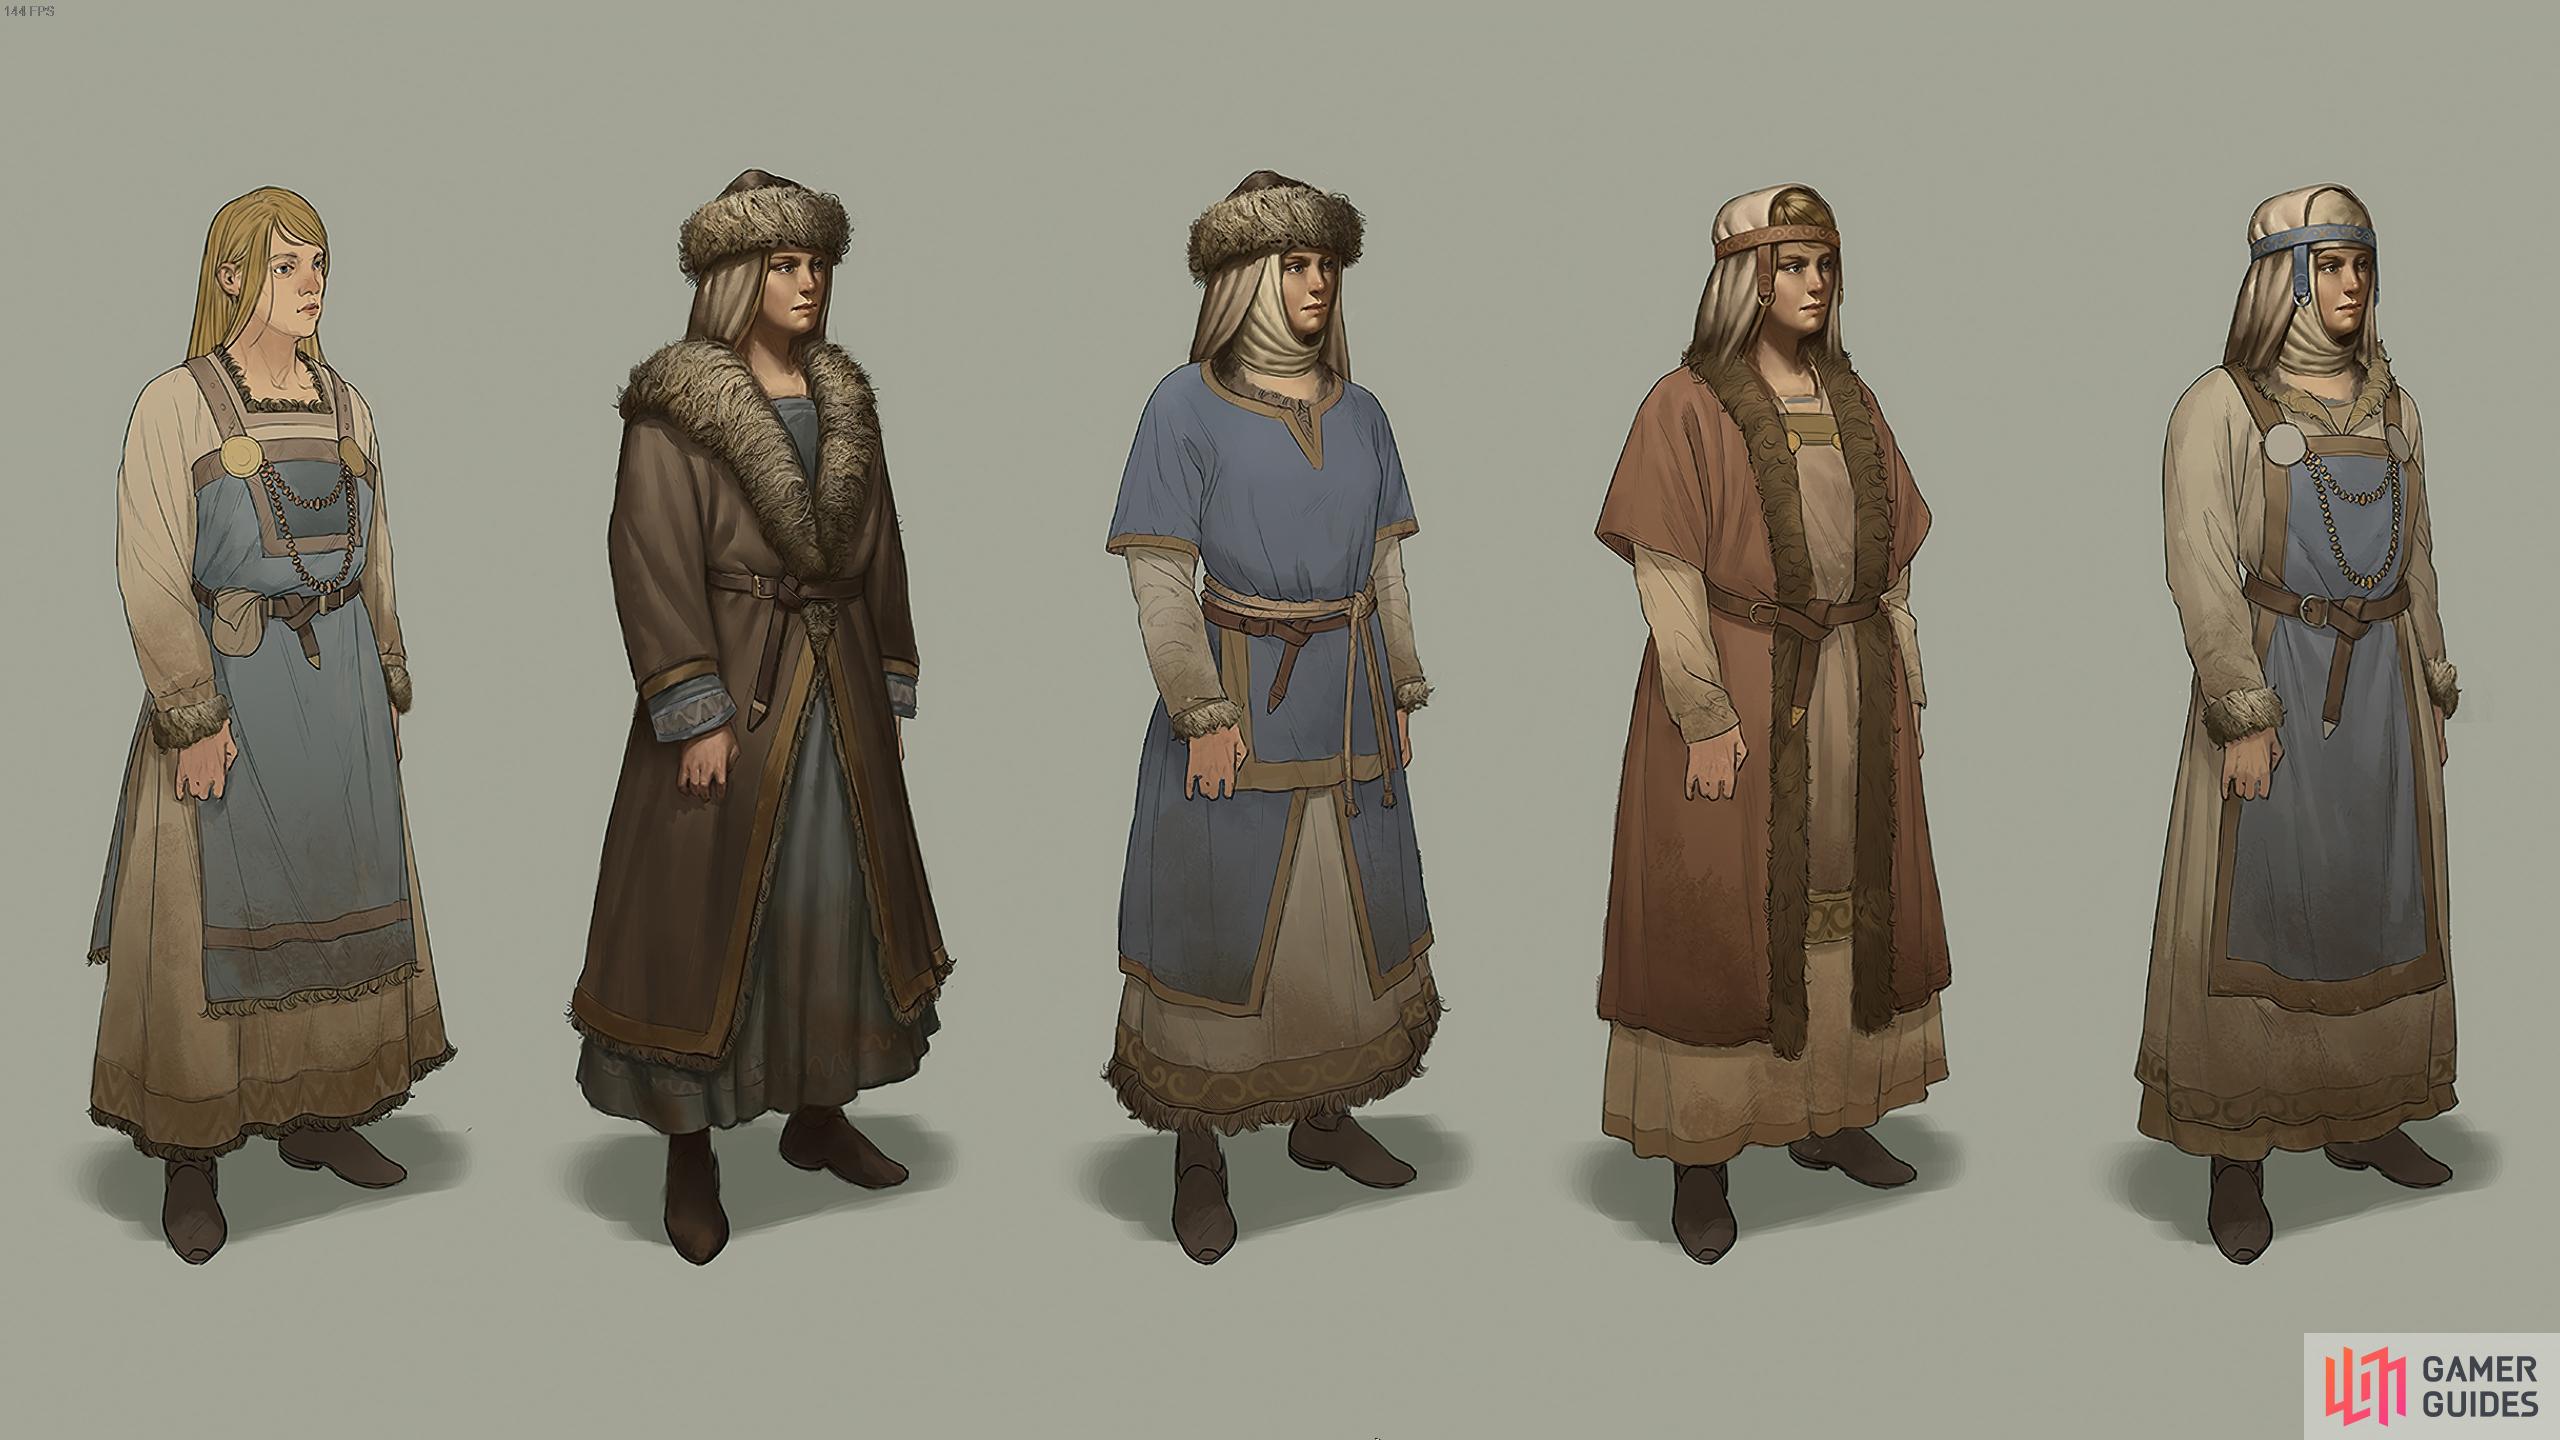 There are plenty of NPC concept art pieces featured.